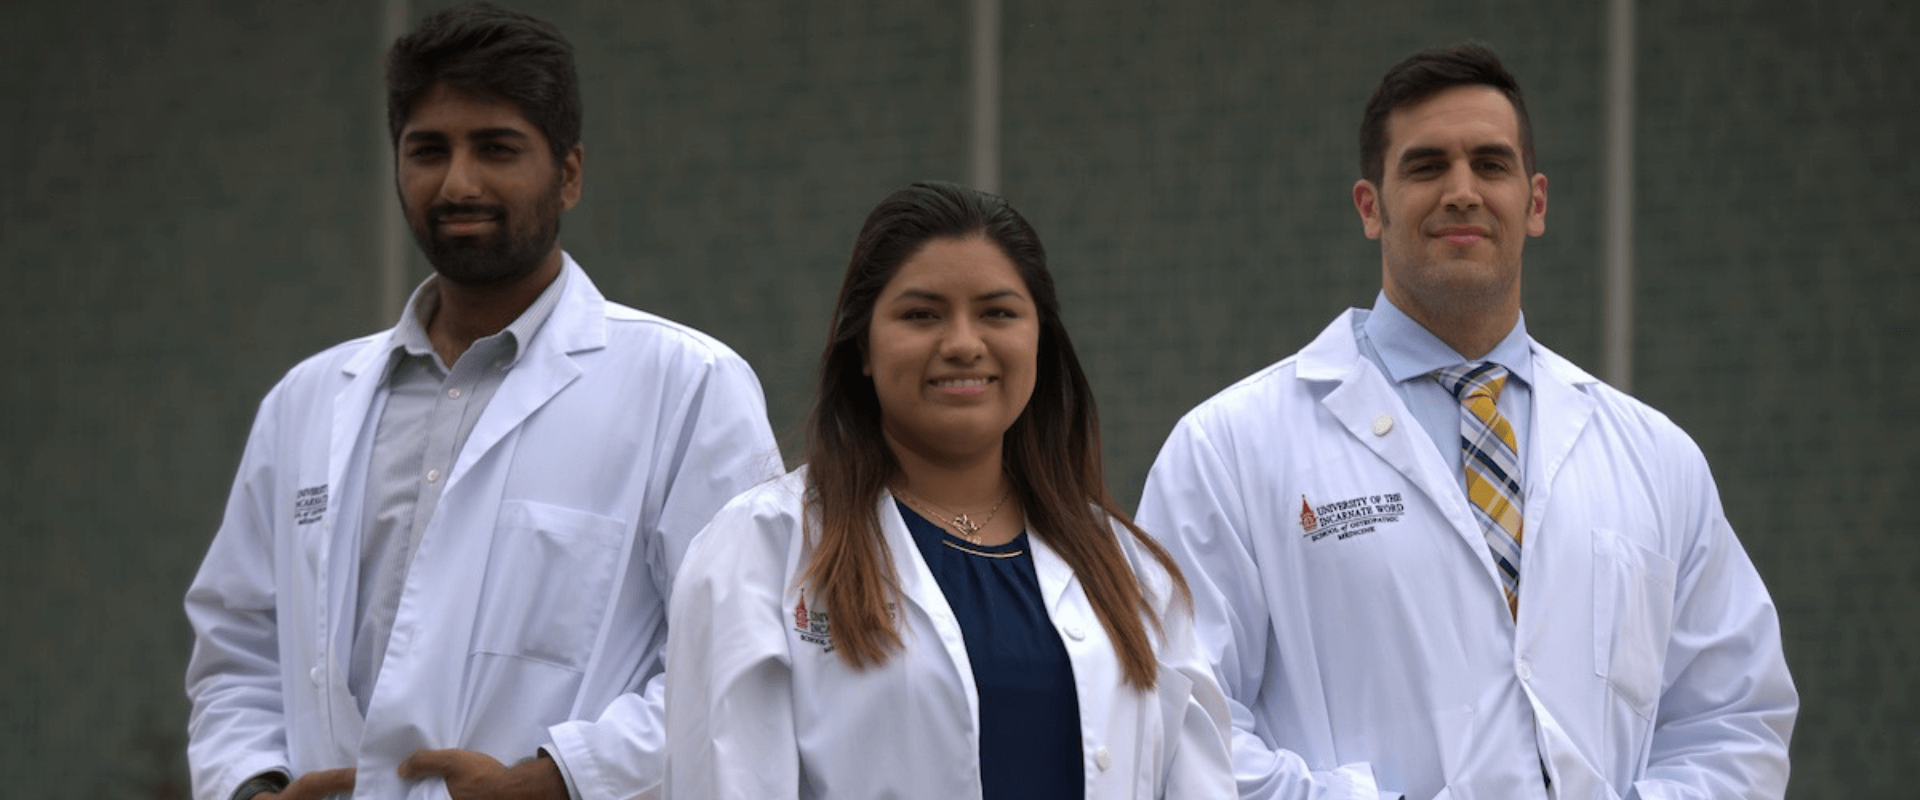 Diverse group of four students in white coats walking